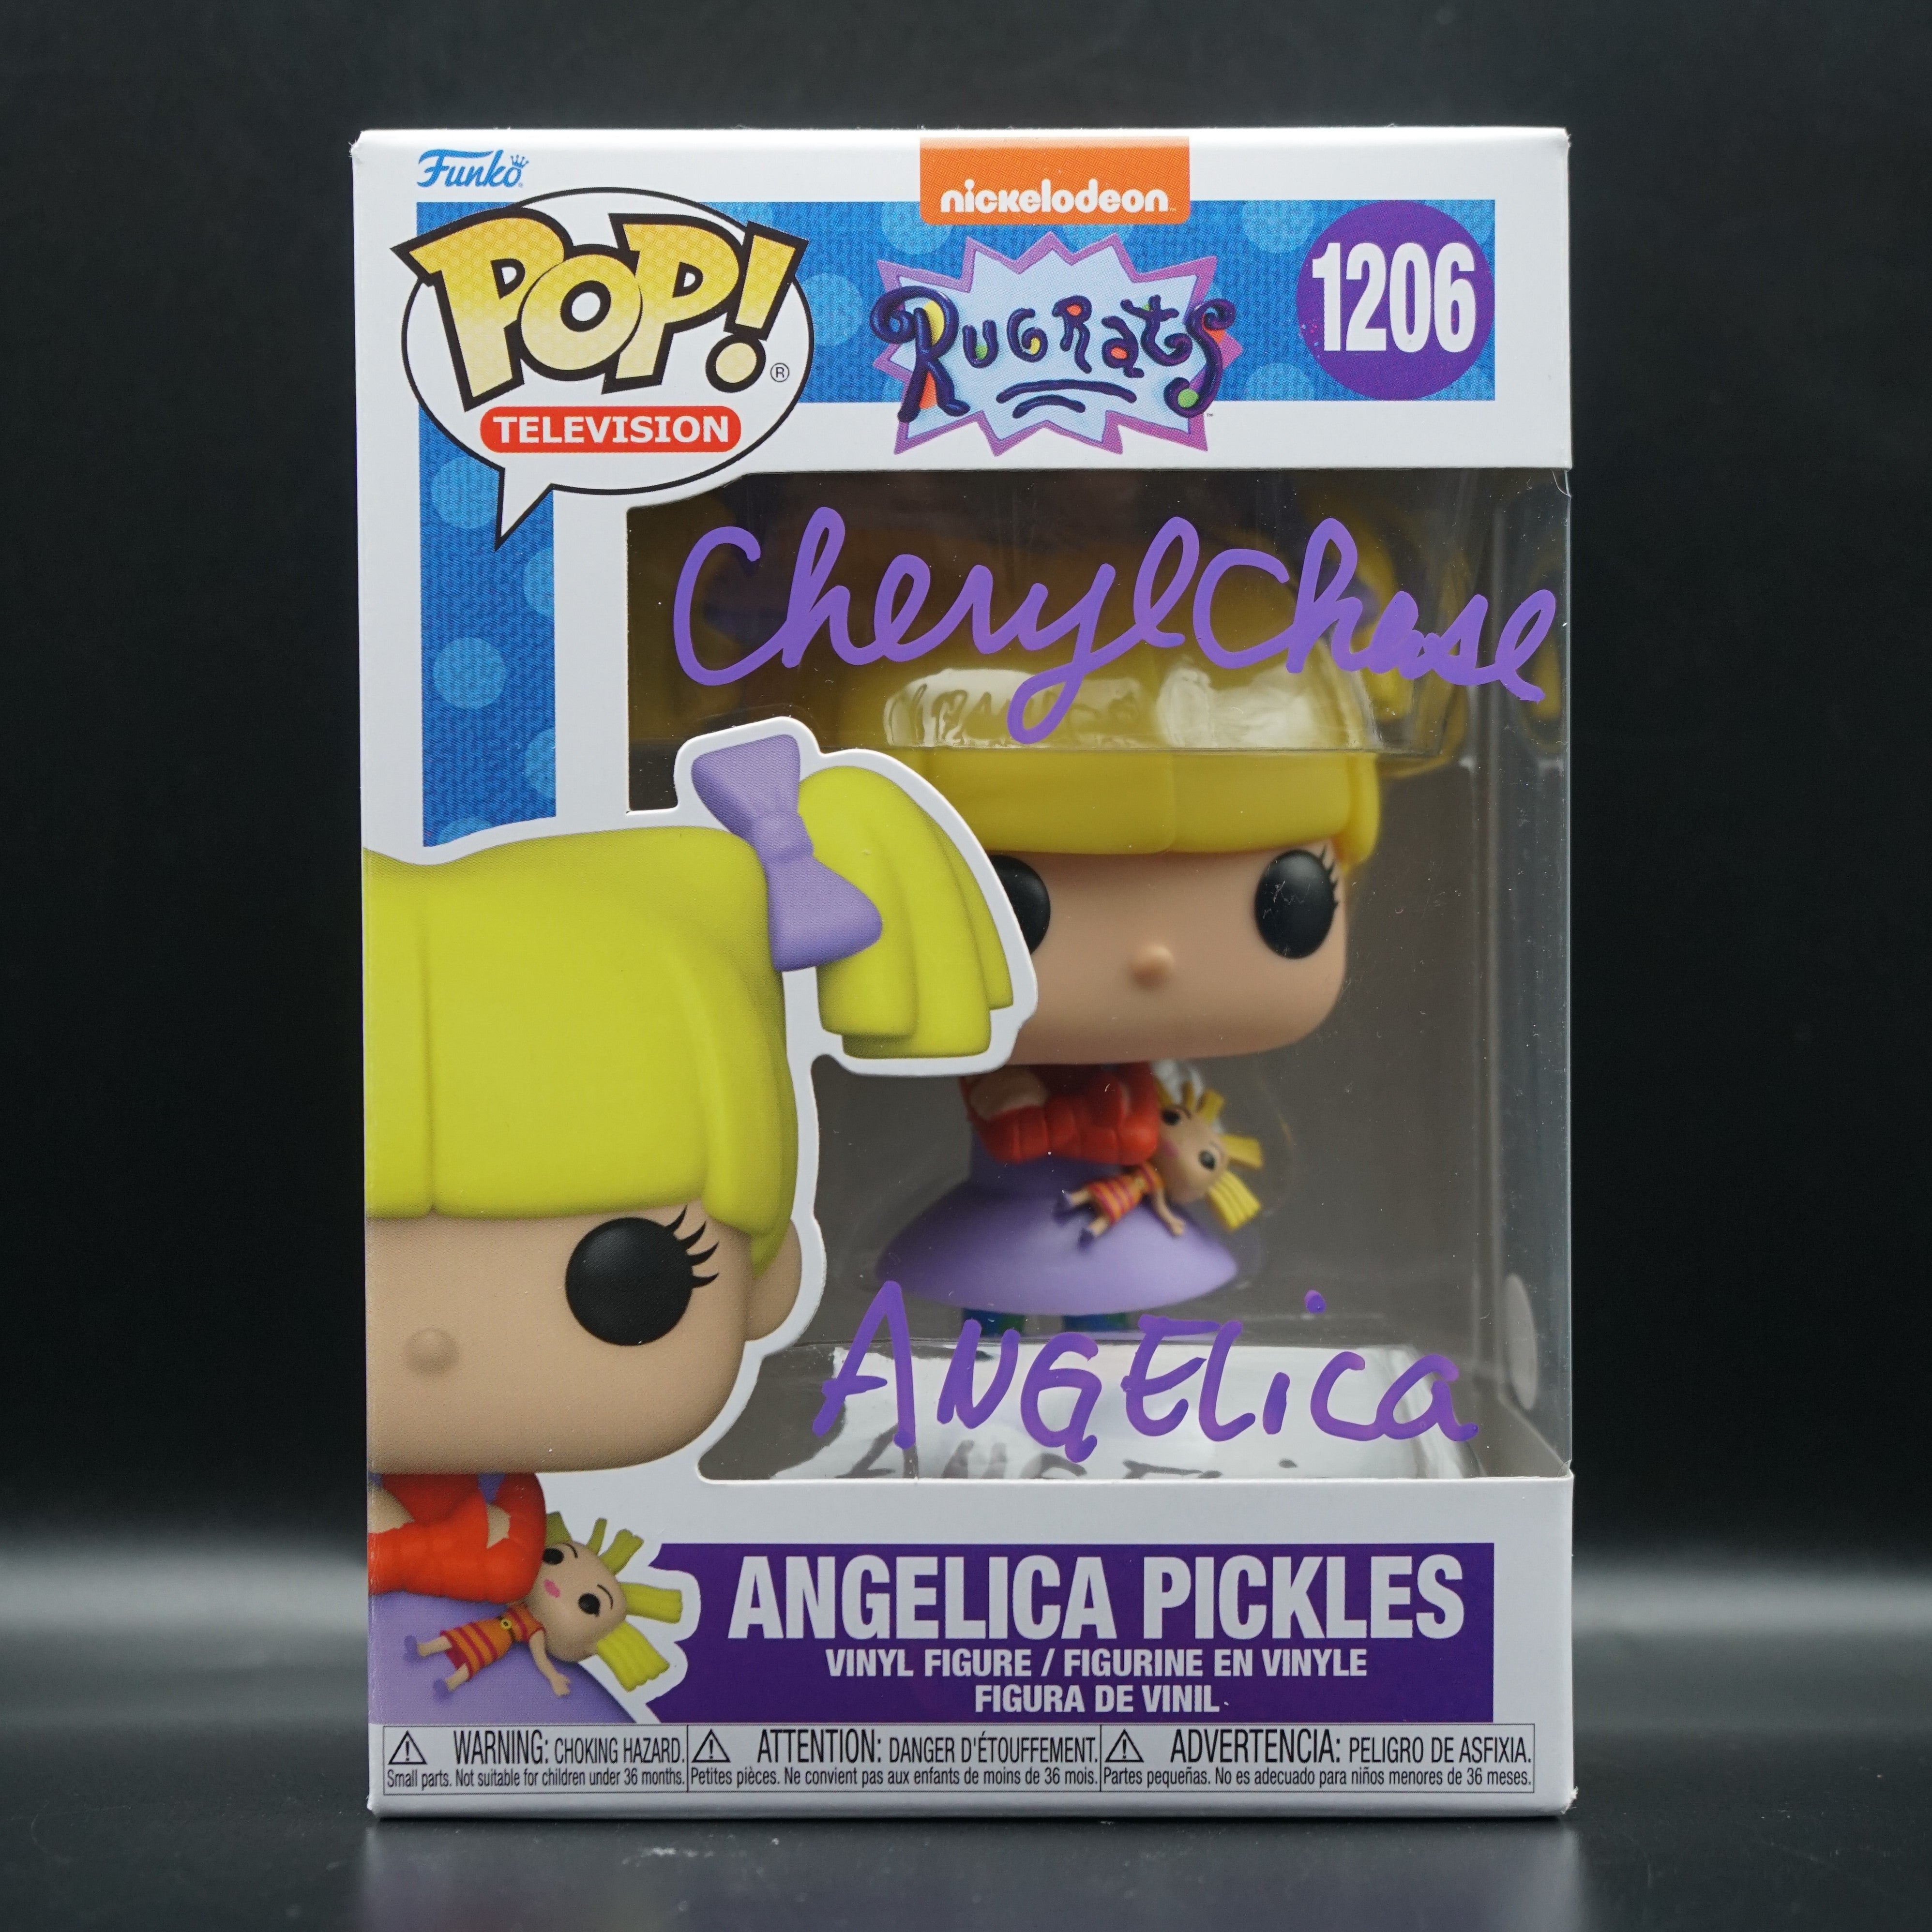 Rugrats Funko Pop #1206 Angelica Pickles from Nickelodeon Cartoon PSA COA with inscription "ANGELICA" - Signed by Cheryl Chase